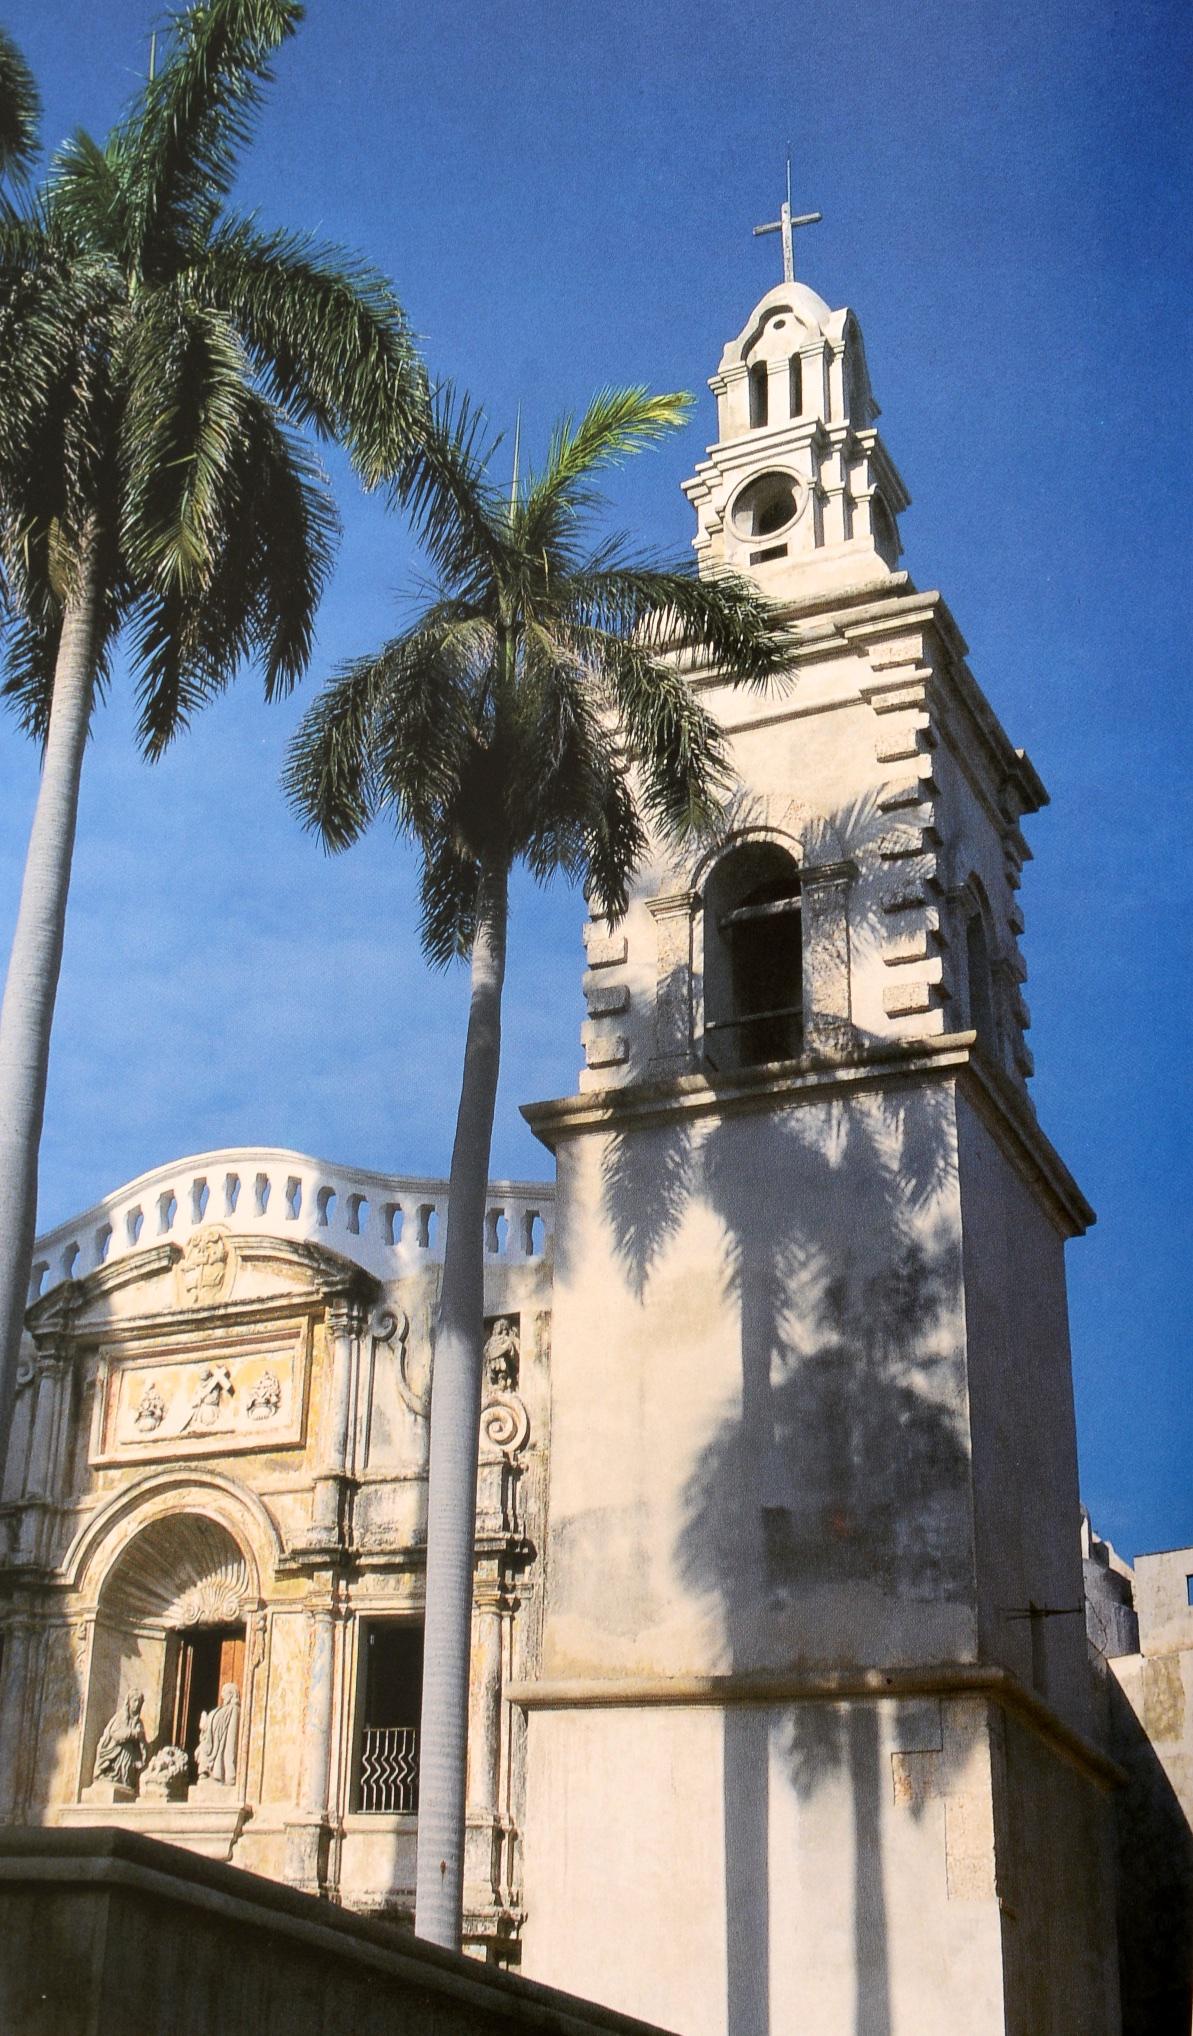 Contemporary Cuba: 400 Years of Architectural Heritage by Rachel Carley, Stated 1st Printing